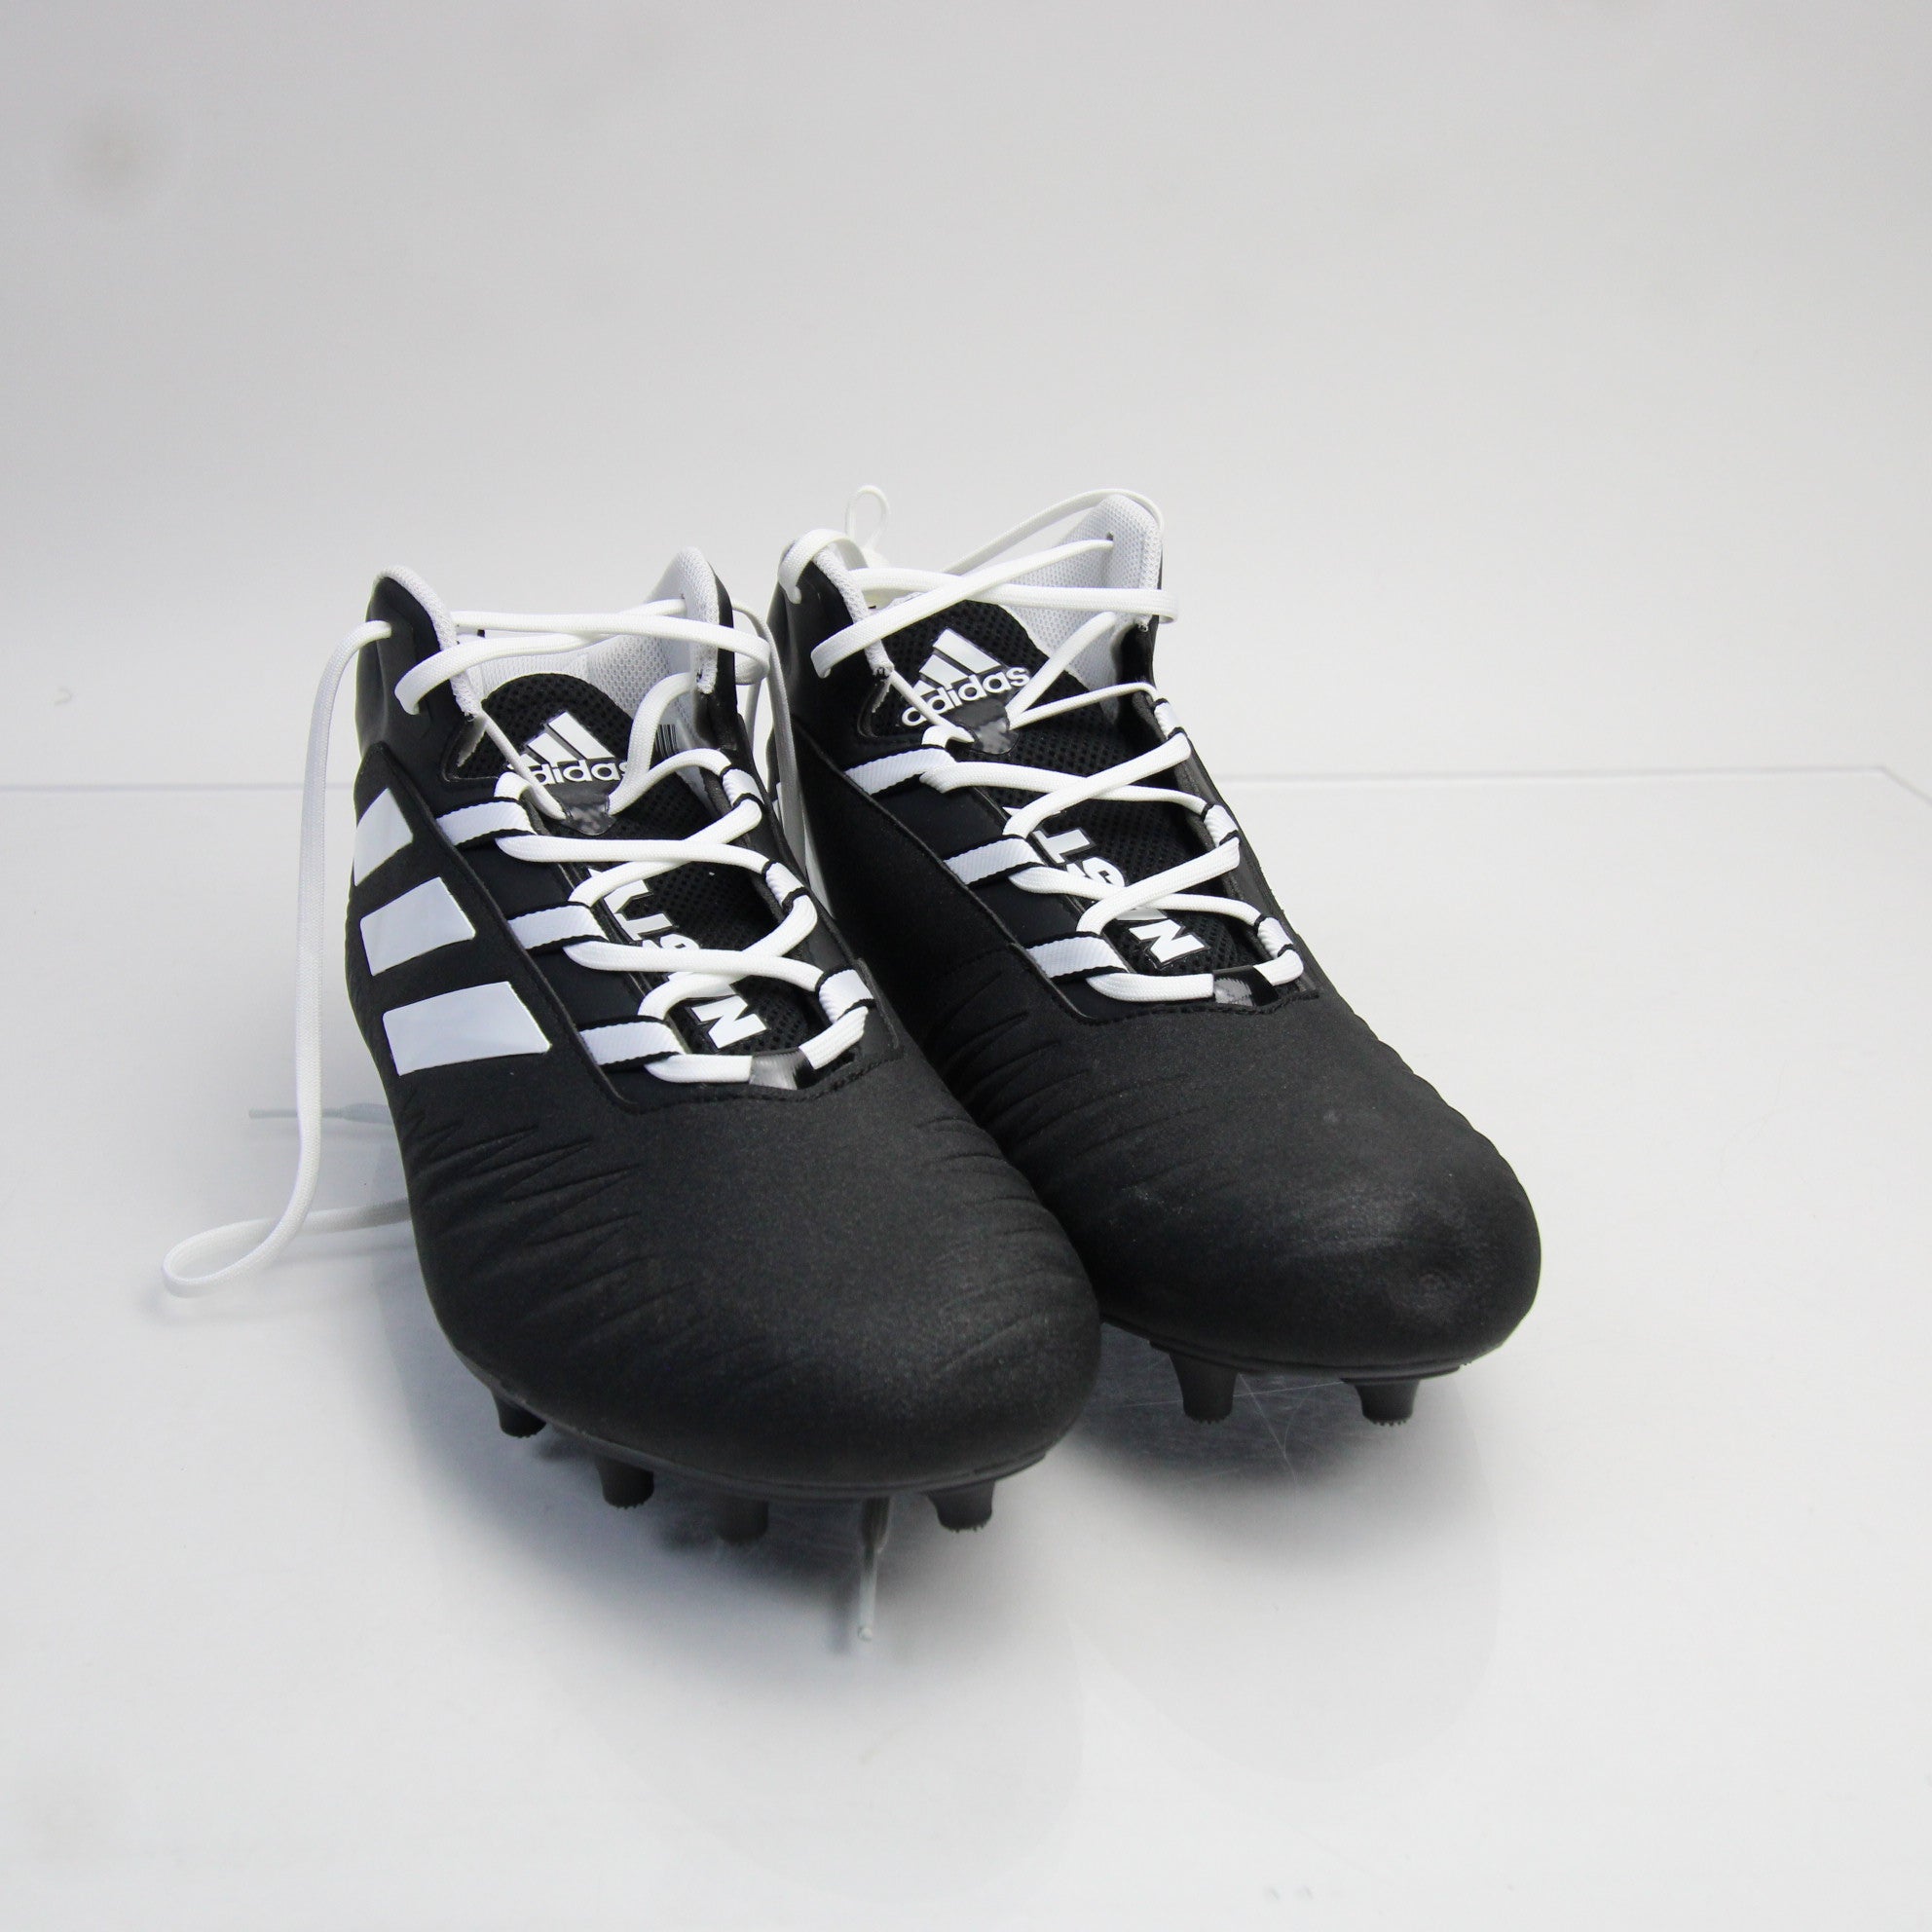 adidas Nasty Football Cleat Men's Black/White New without Box 14 |